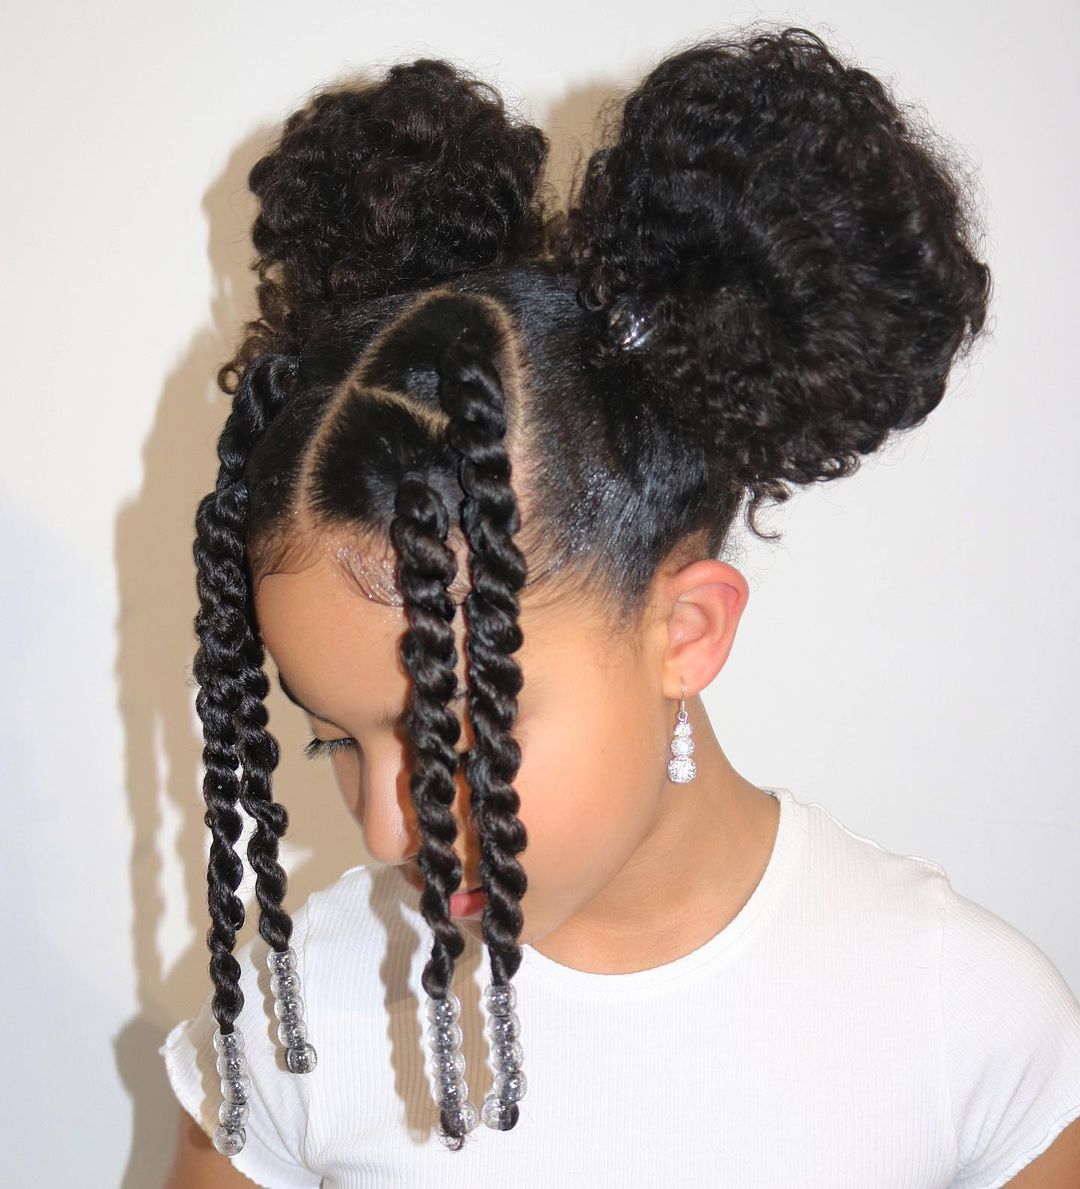 7. Double Up Bun And Frontal Two Strand Twists With Beads